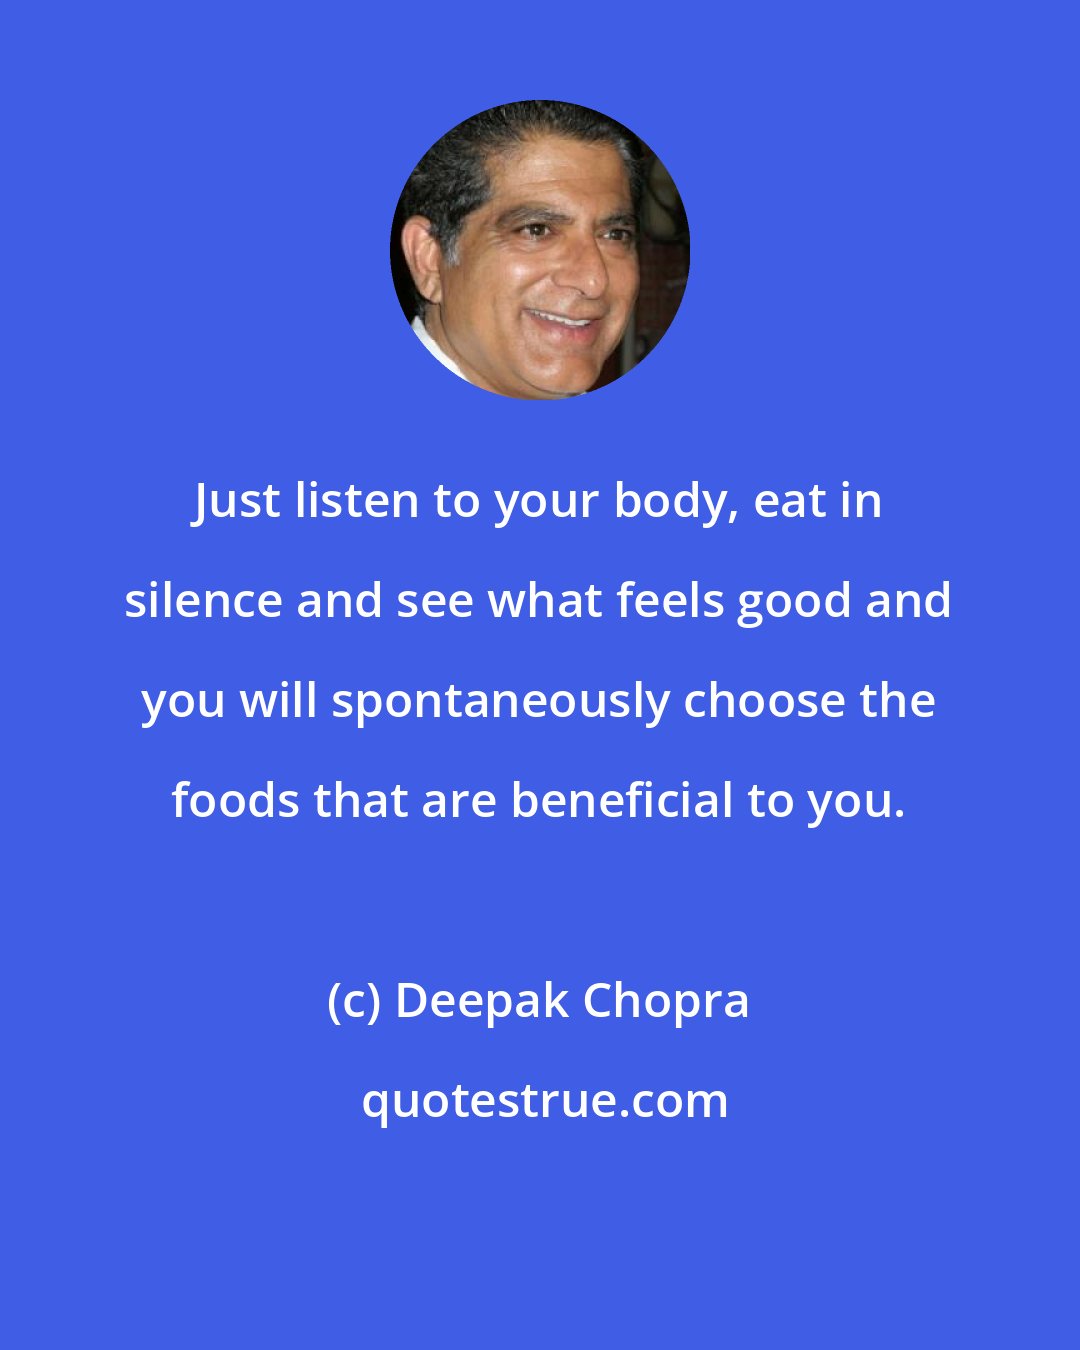 Deepak Chopra: Just listen to your body, eat in silence and see what feels good and you will spontaneously choose the foods that are beneficial to you.